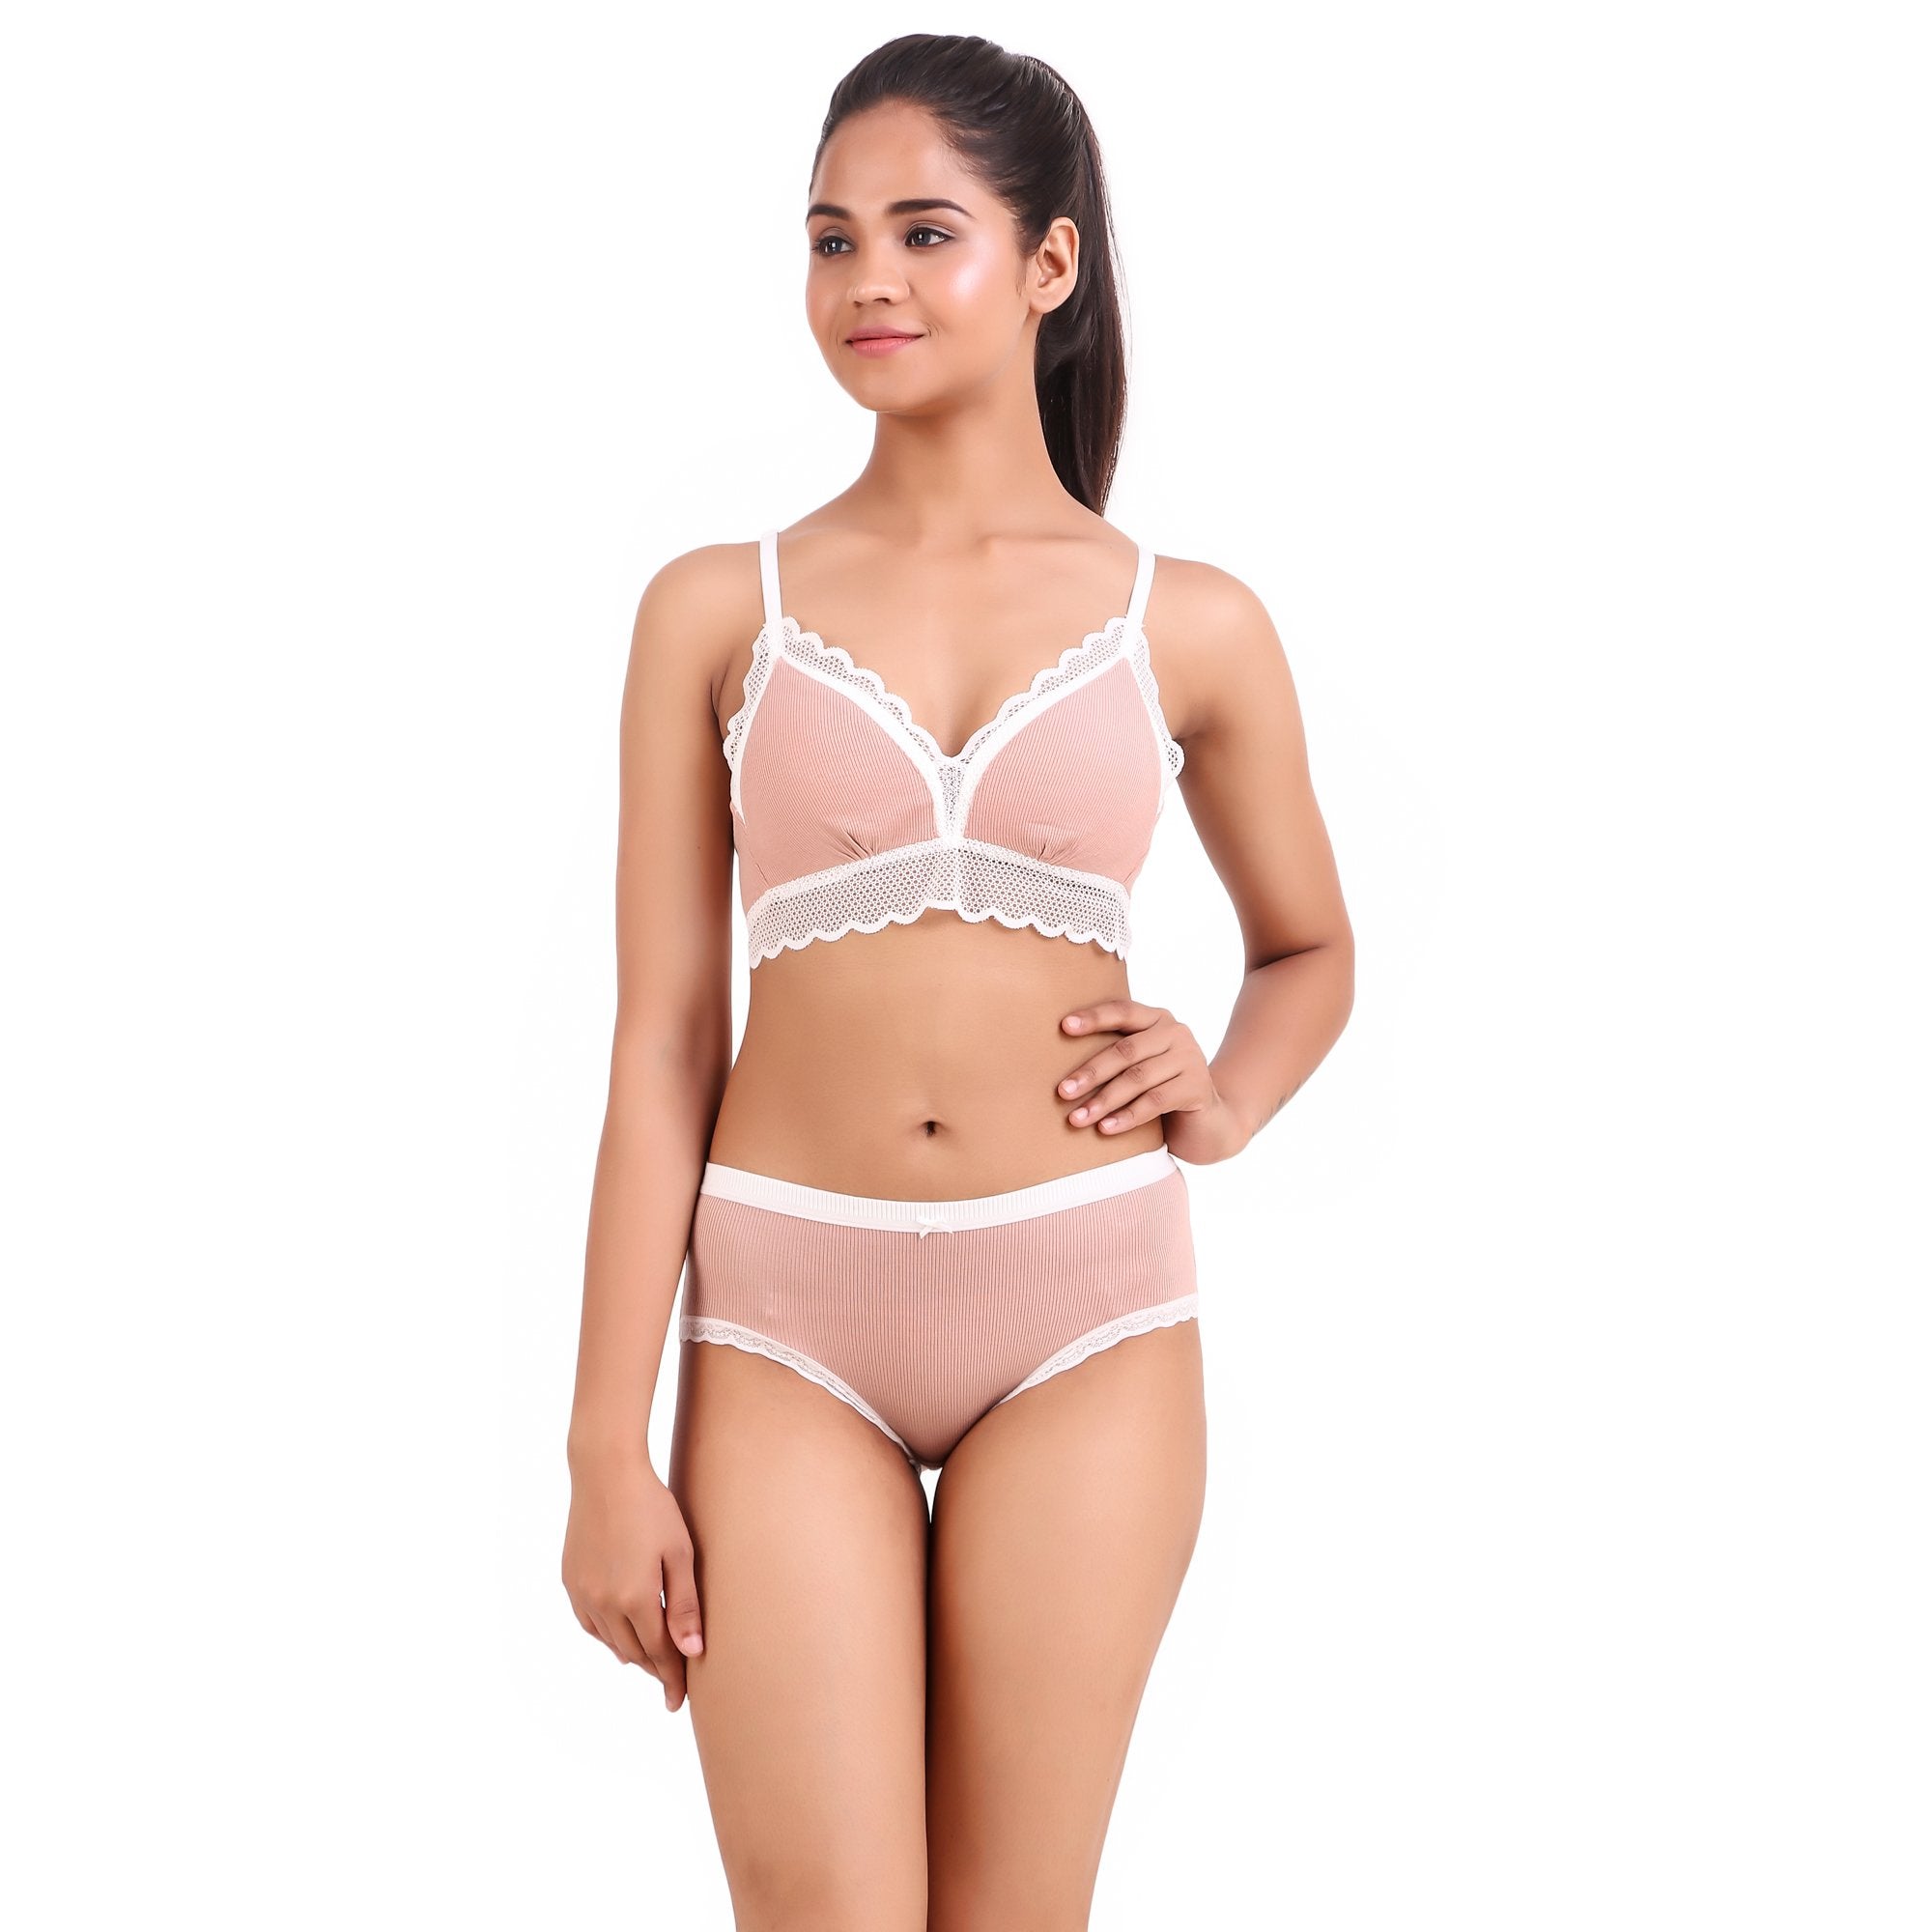 AXTZH-XBRA033 Soft cup non wired bra with boy short panty set